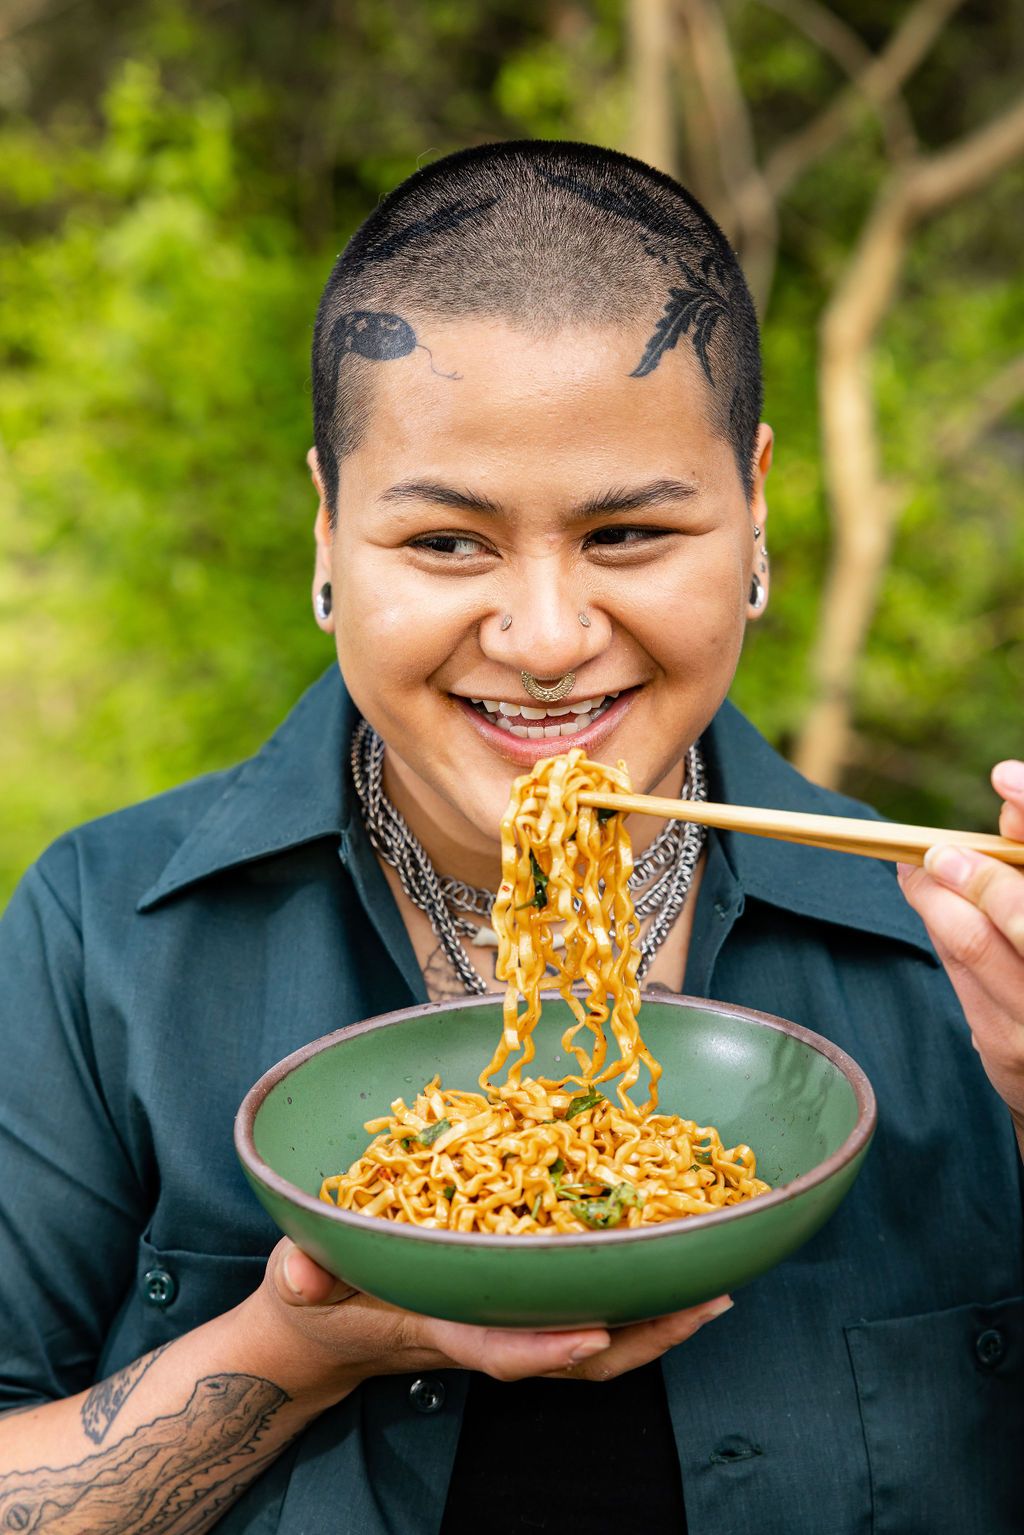 A person with buzzed hair and tattoos on his head and arm is smiling while holding noodles with chopsticks pulled from a medium green bowl.